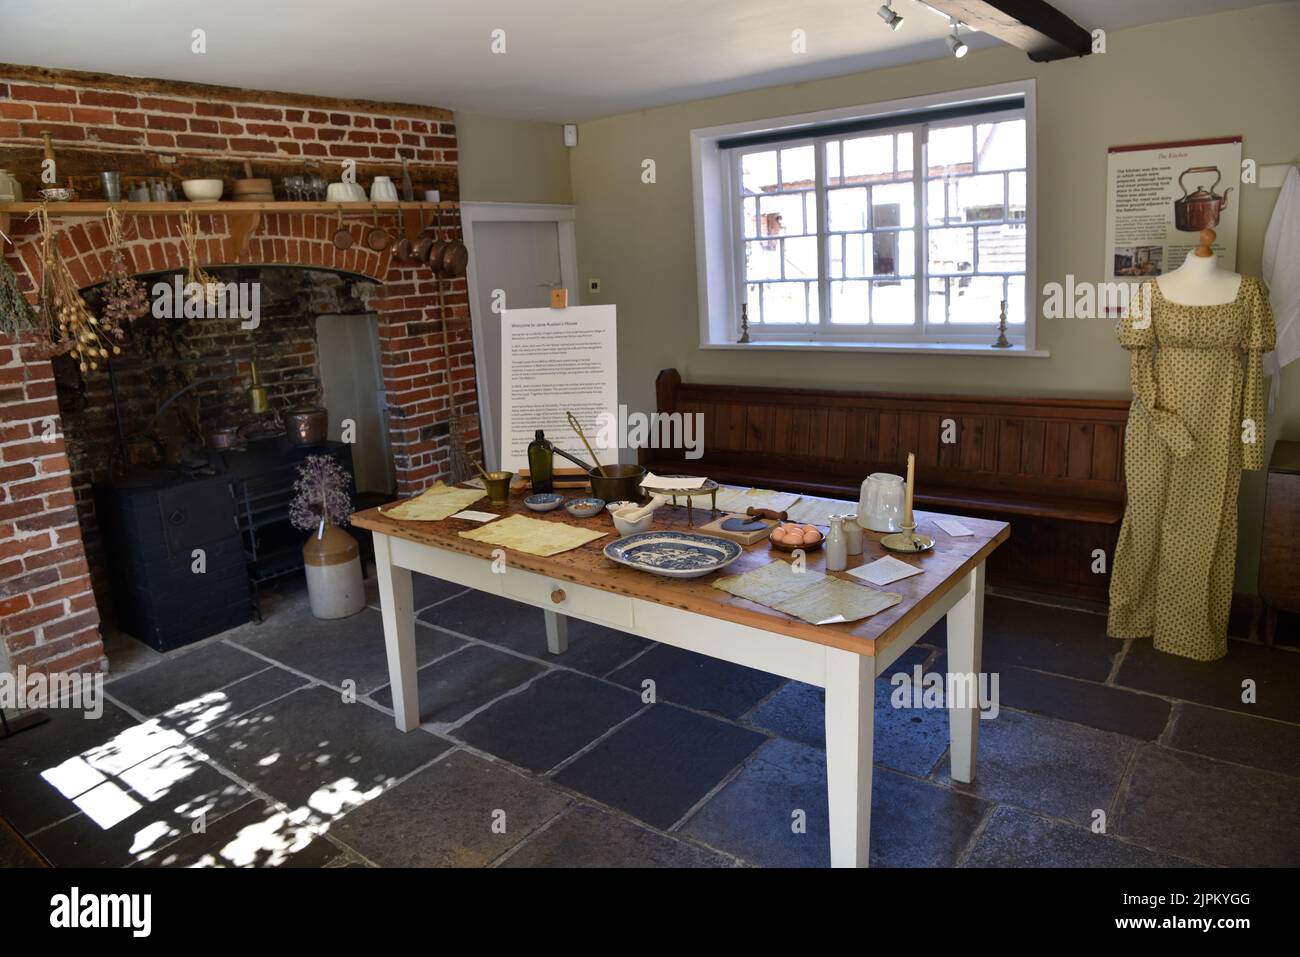 Objects and utensils on display in kitchen at Jane Austen’s House, Chawton, near Alton, Hampshire, UK. Stock Photo